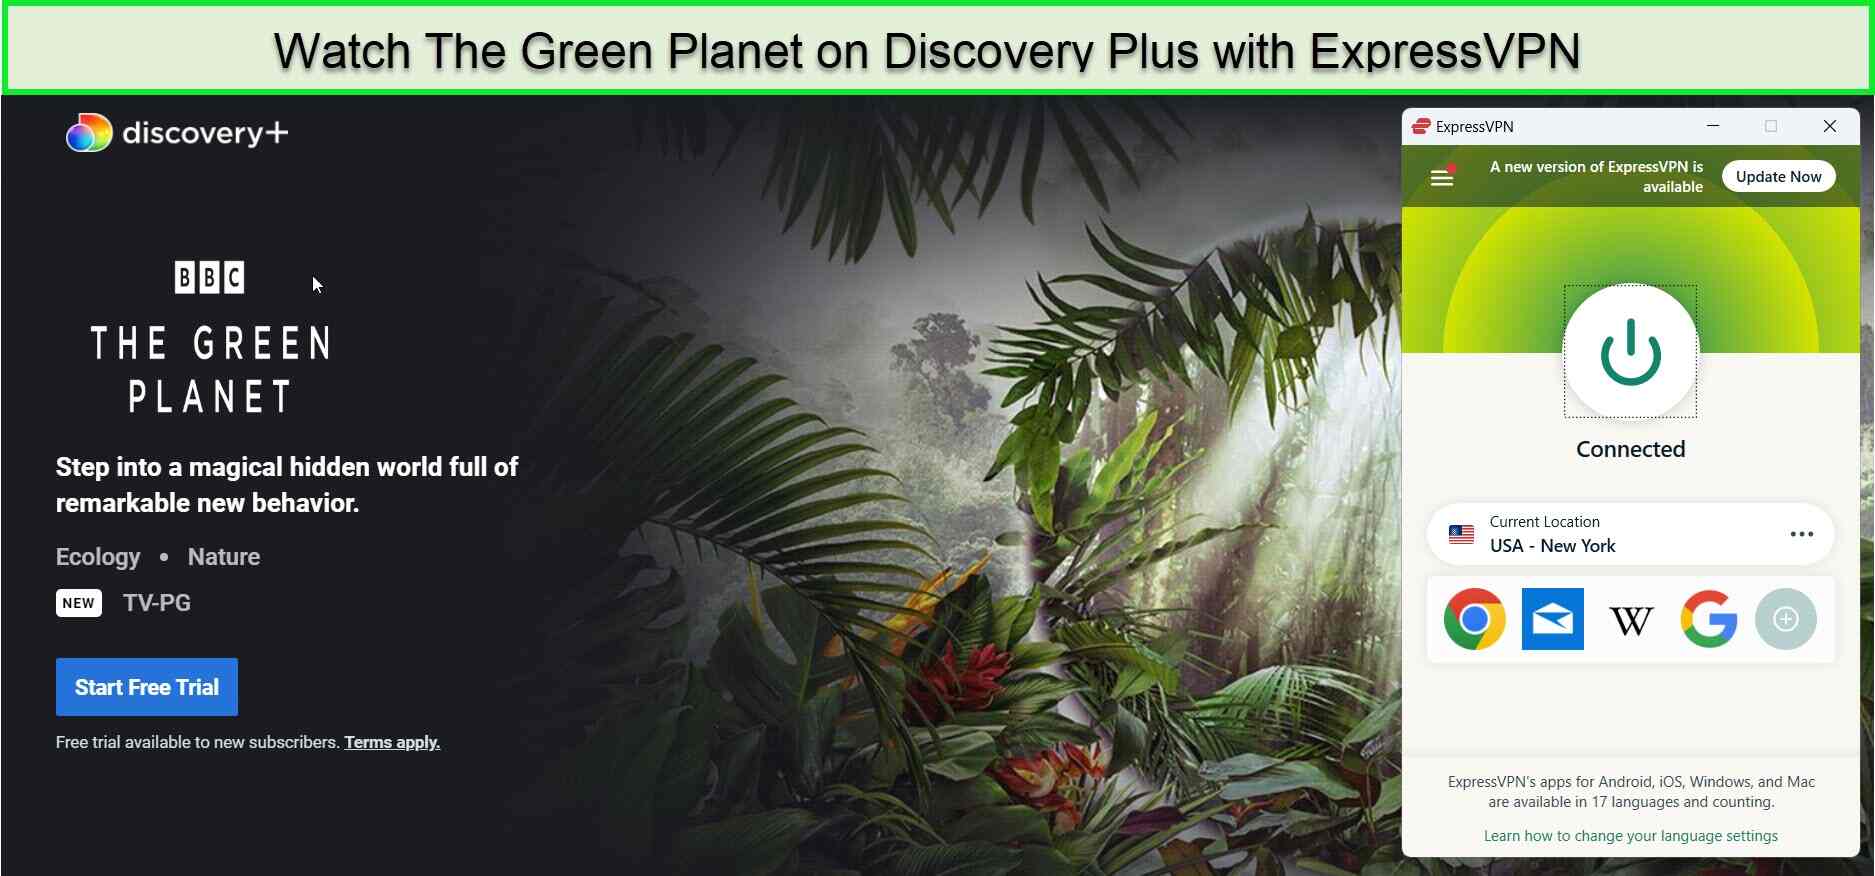 Watch-The-Green-Planet-in-New Zealand-on-Discovery-Plus-with-ExpressVPN